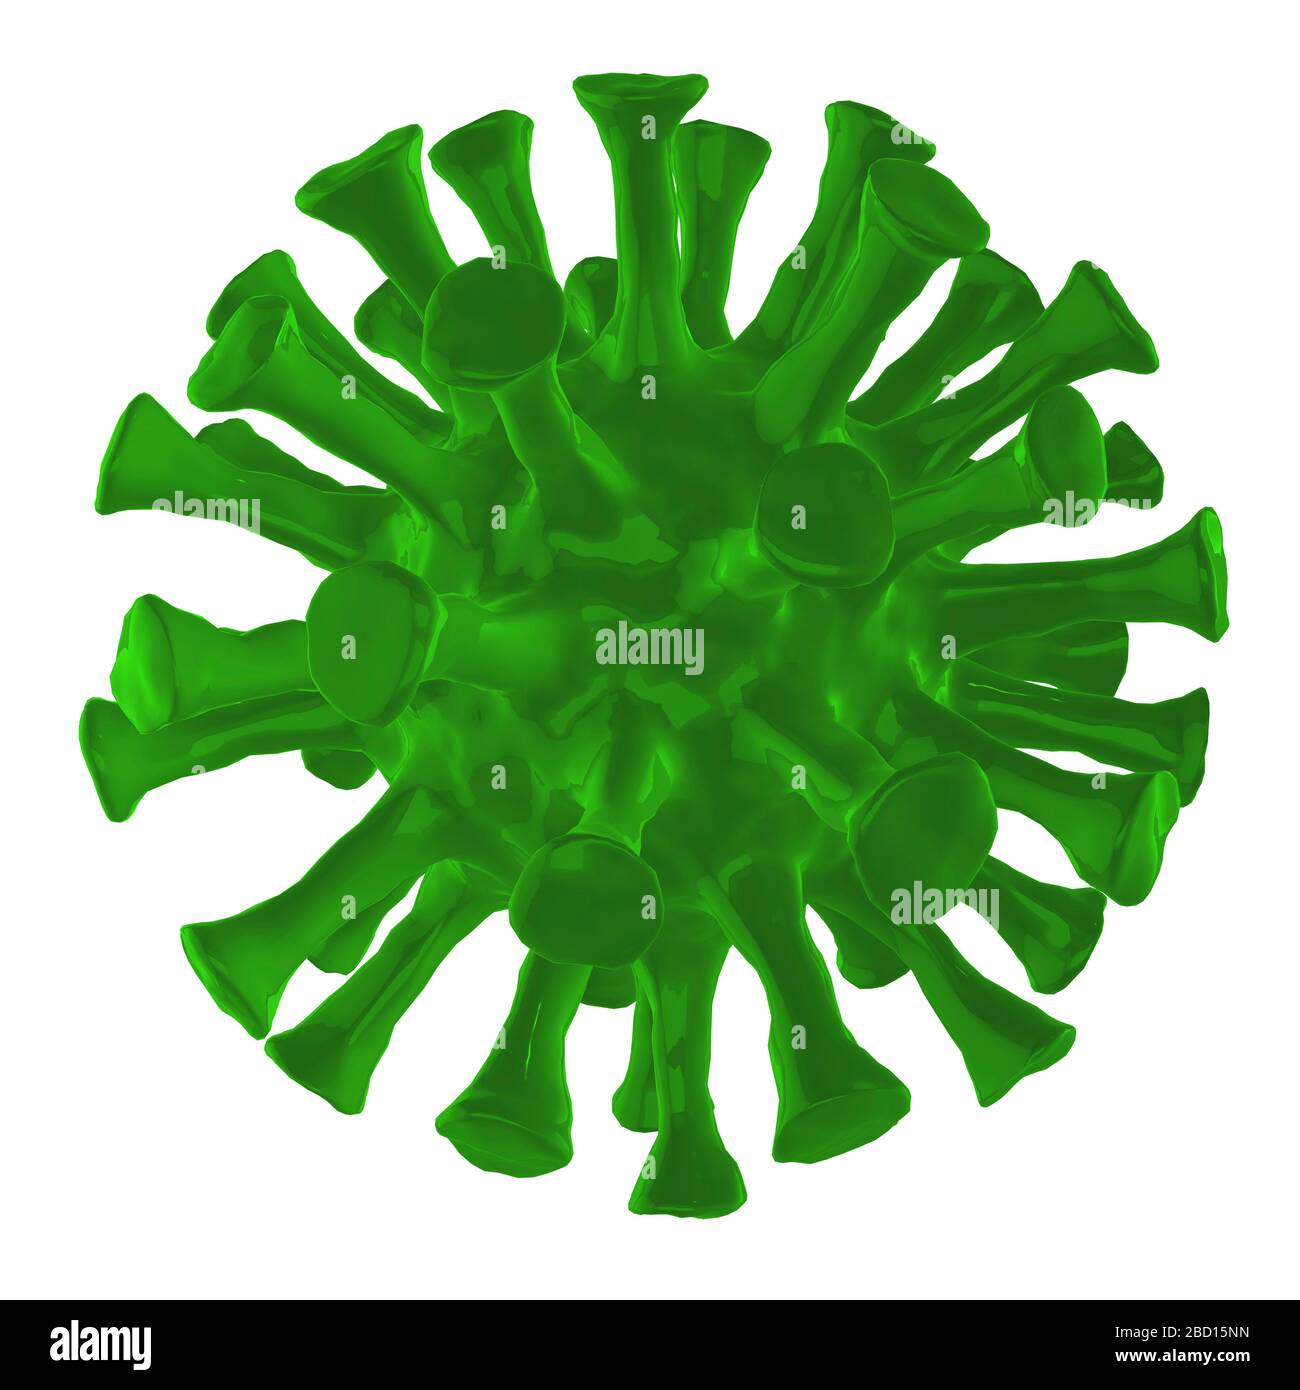 3d model of a RNA corona virus covid 19 pathogen cut out  against a plain white background allowing room for text Stock Photo